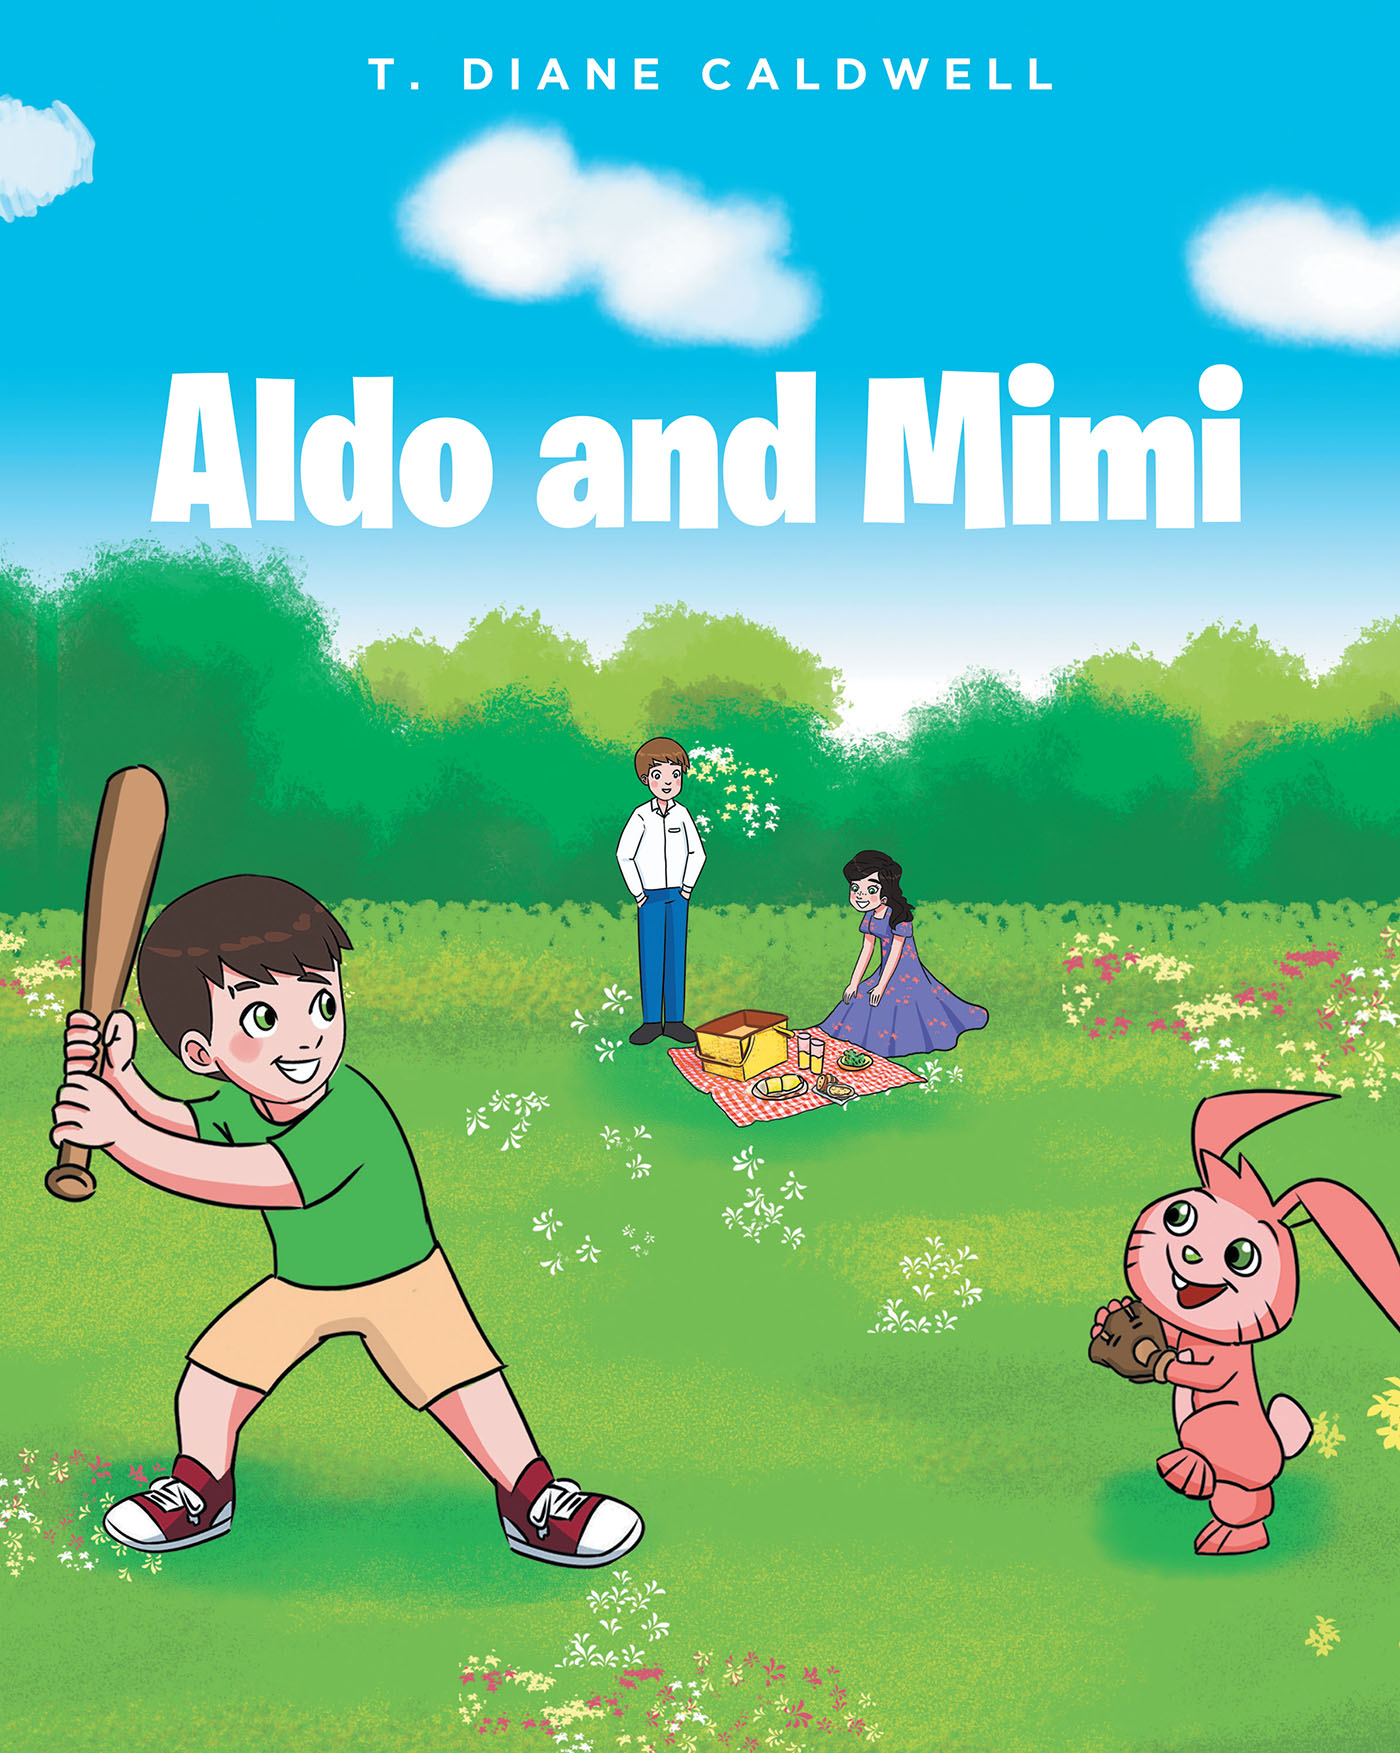 T. Diane Caldwell’s New Book, "Aldo and Mimi," is a Charming Children’s Story About the Bond Between Children and Their Pets and the Unconditional Love of a Parent